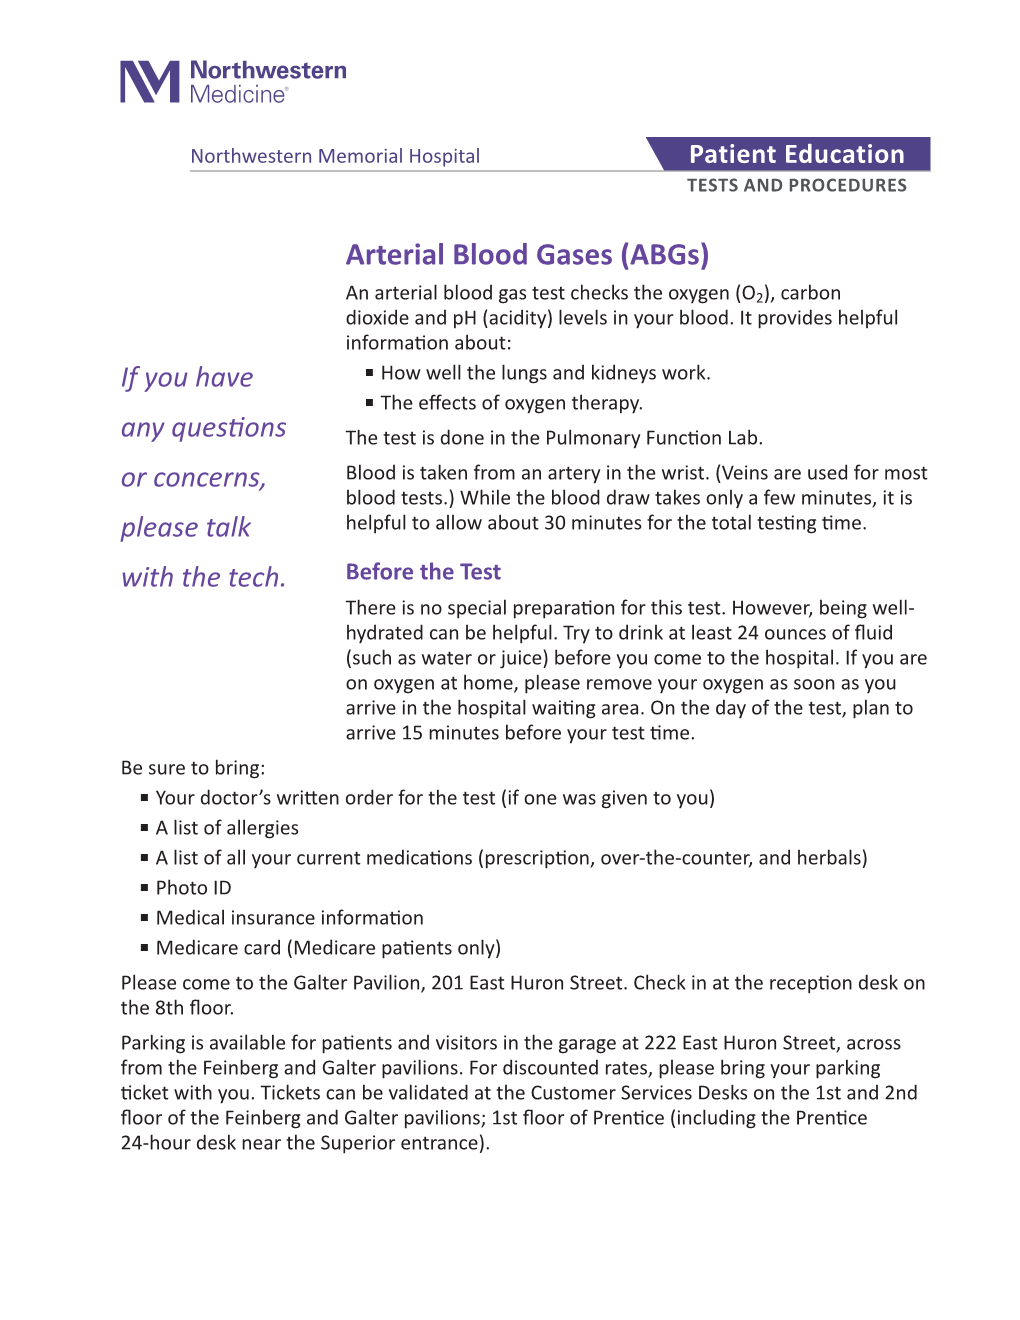 Arterial Blood Gases (Abgs)